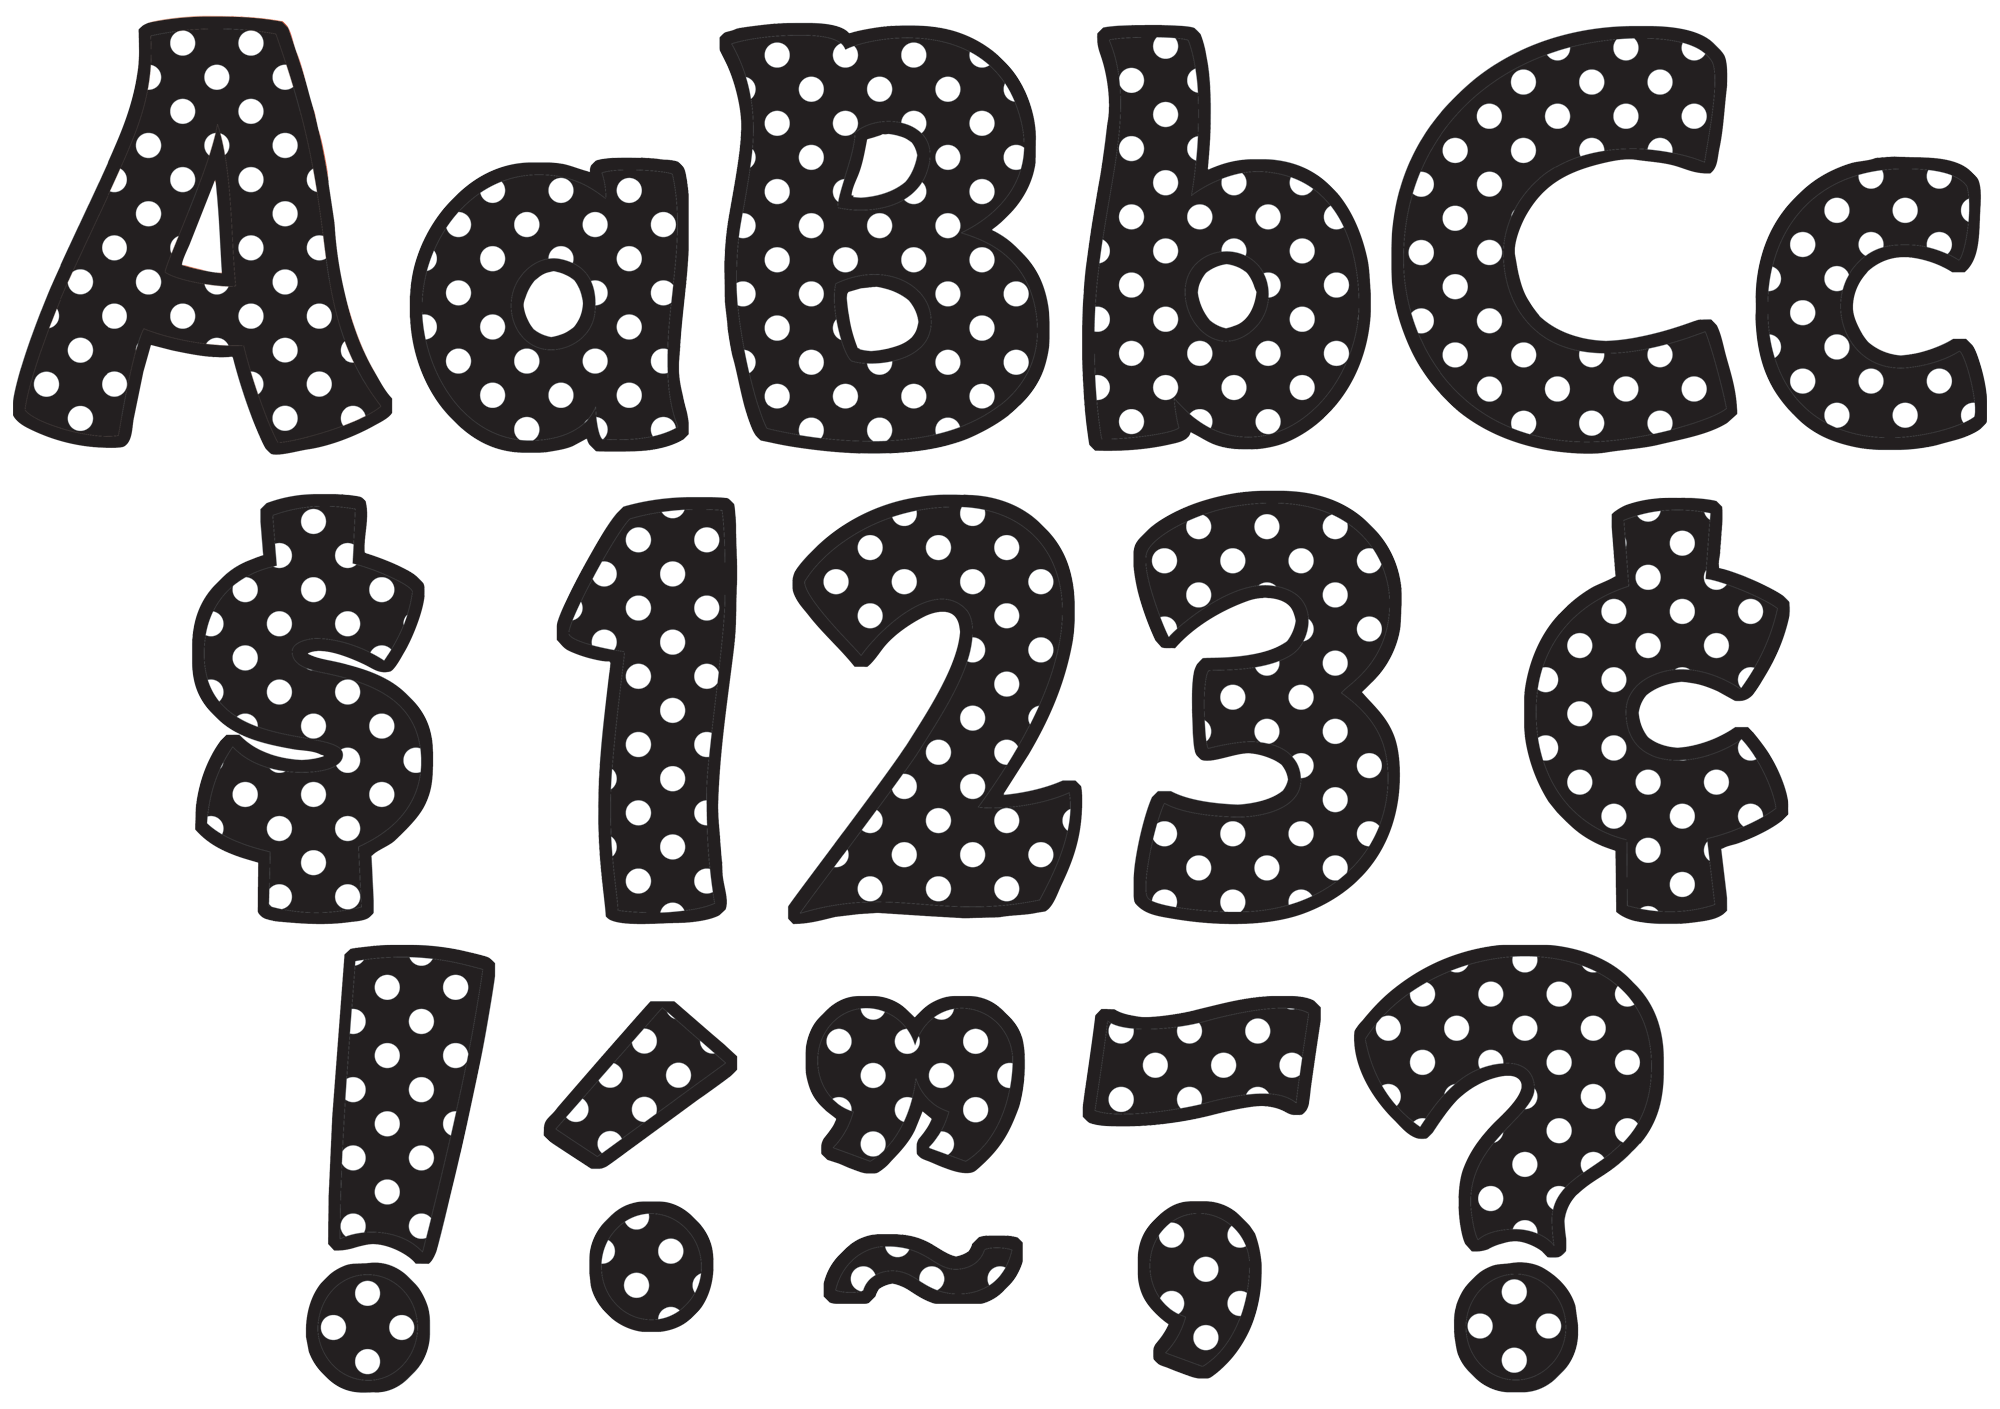 polka-dots-letters-alphabet-letters-and-numbers-with-polka-dots